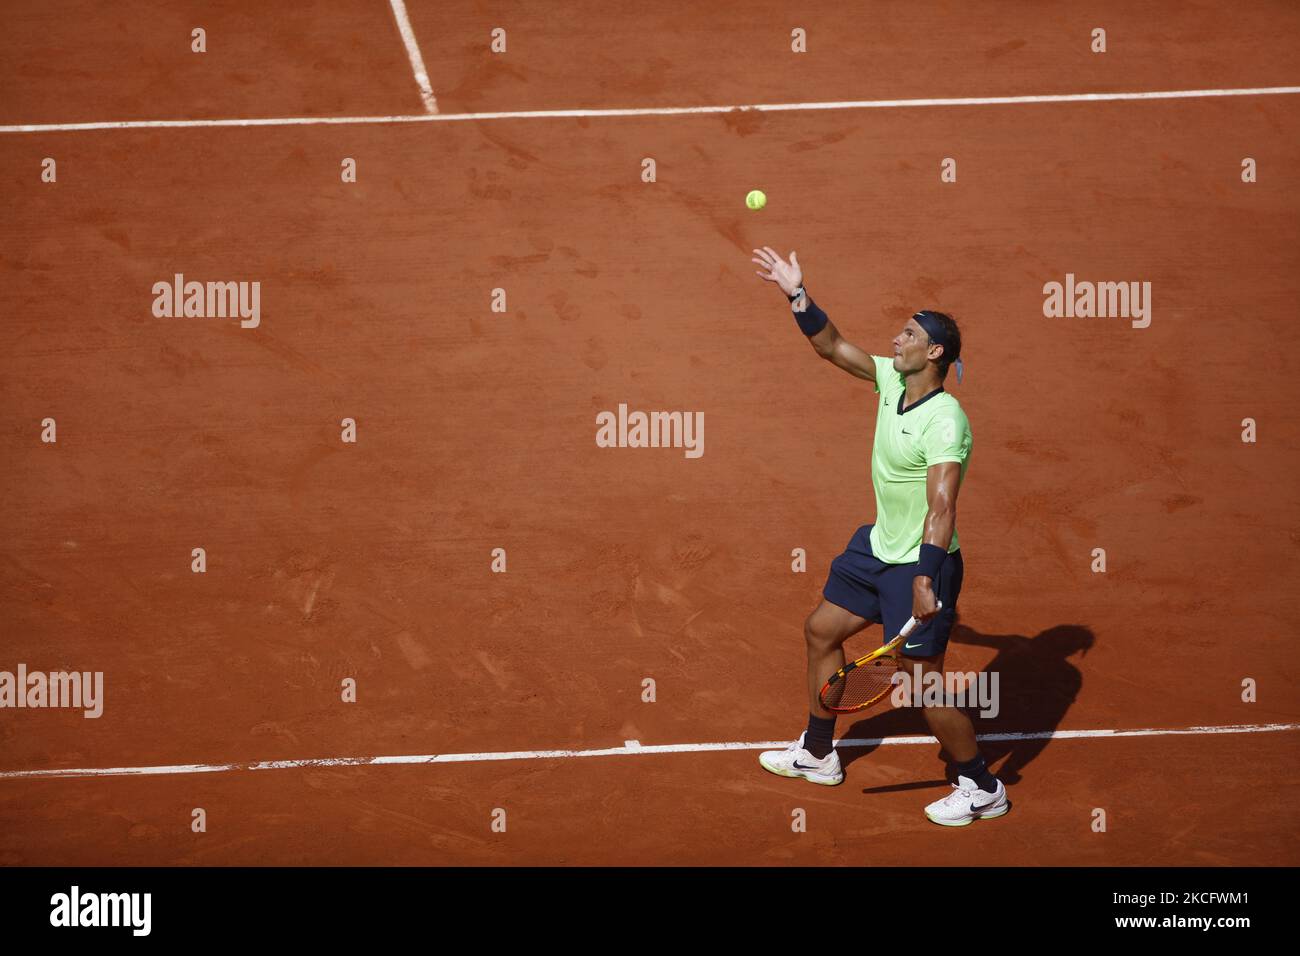 Spain's Rafael Nadal plays against Argentina's Diego Schwartzman during their men's singles quarter-final tennis match on Day 11 of The Roland Garros 2021 French Open tennis tournament in Paris, France on June 9, 2021.(Photo by Mehdi Taamallah/NurPhoto) Stock Photo